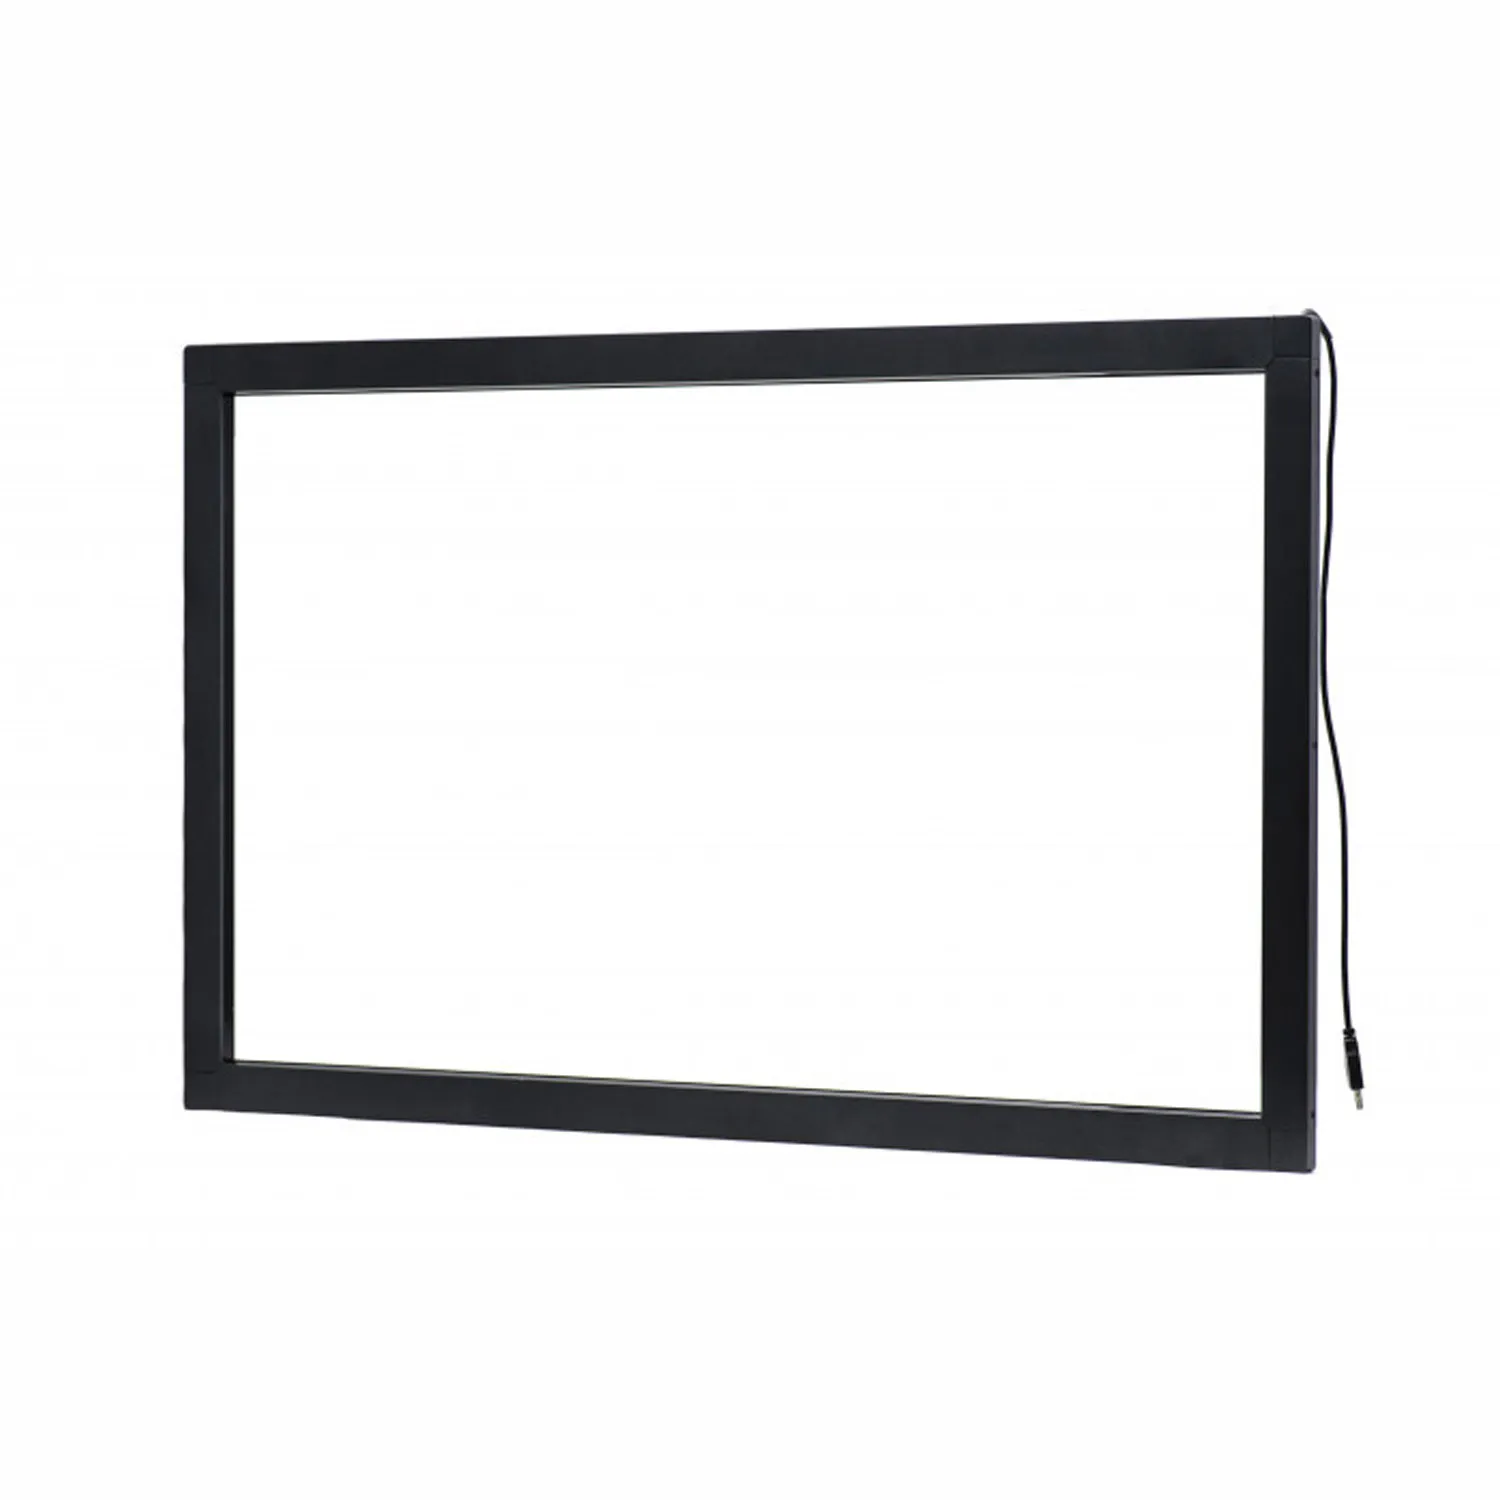 Touch frame Keetouch GmbH 42" KP-420-IP2S0U1